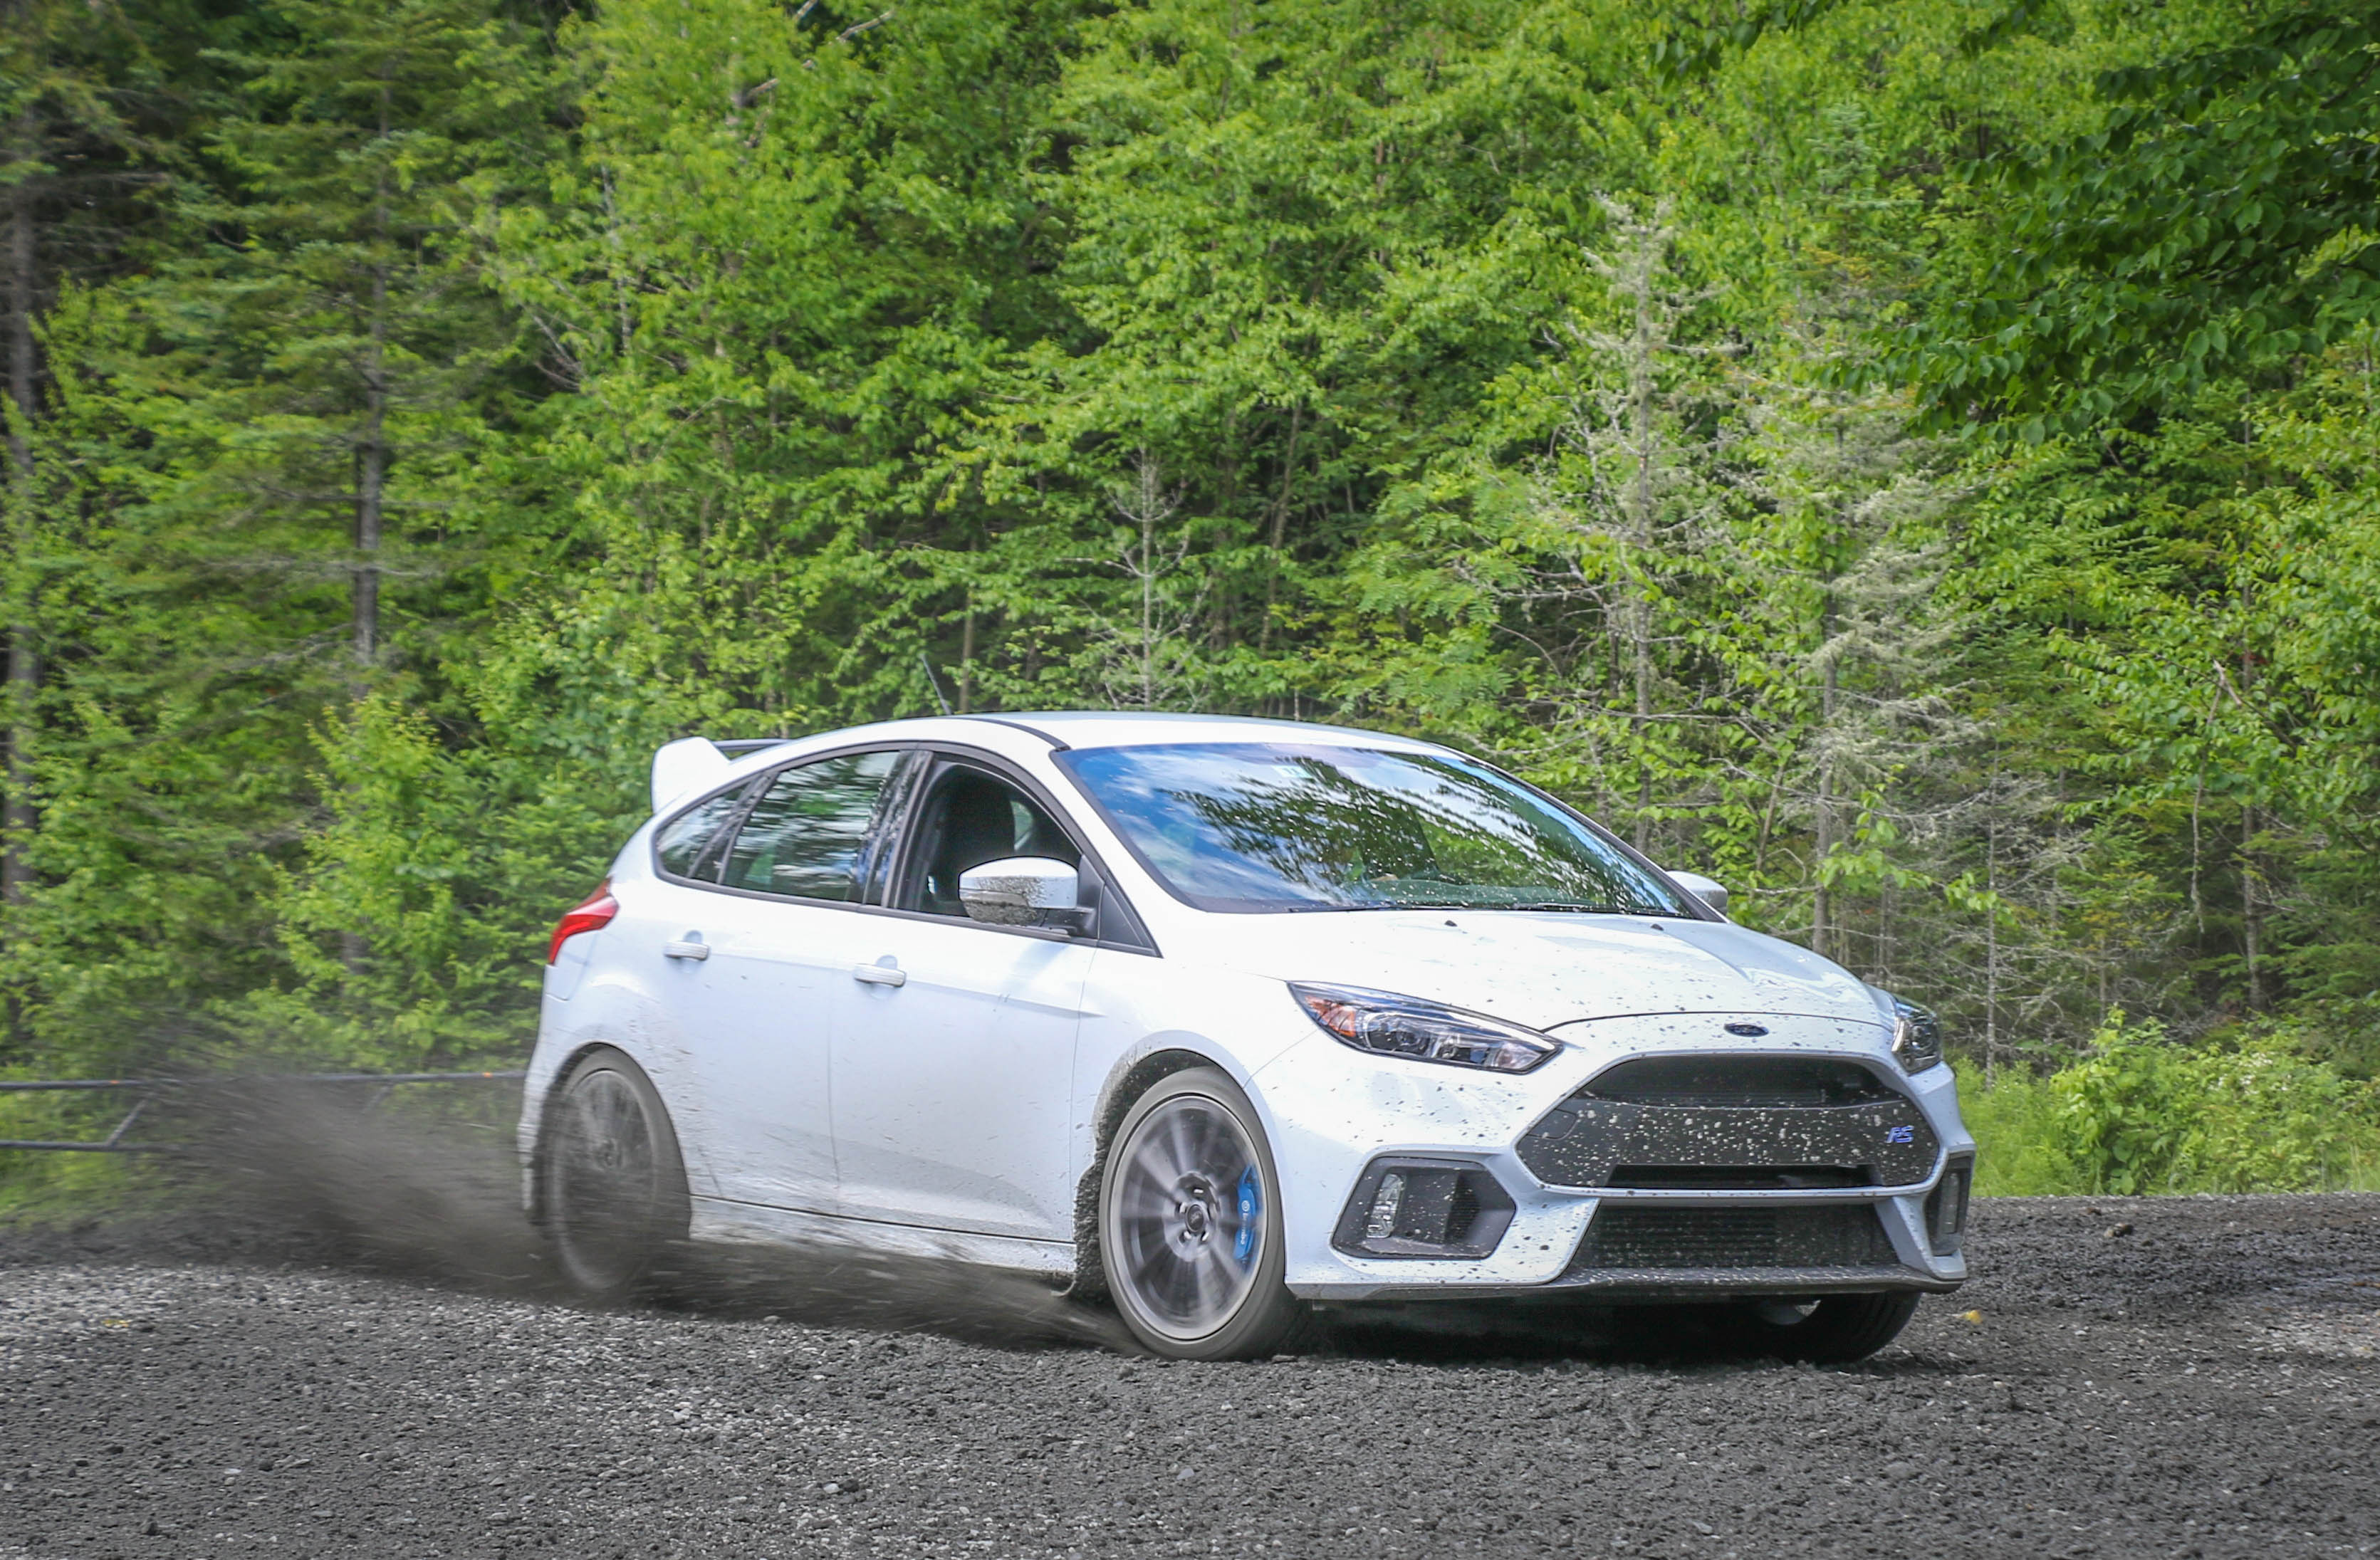 Ford Focus with manual transmission driving on a dirt road